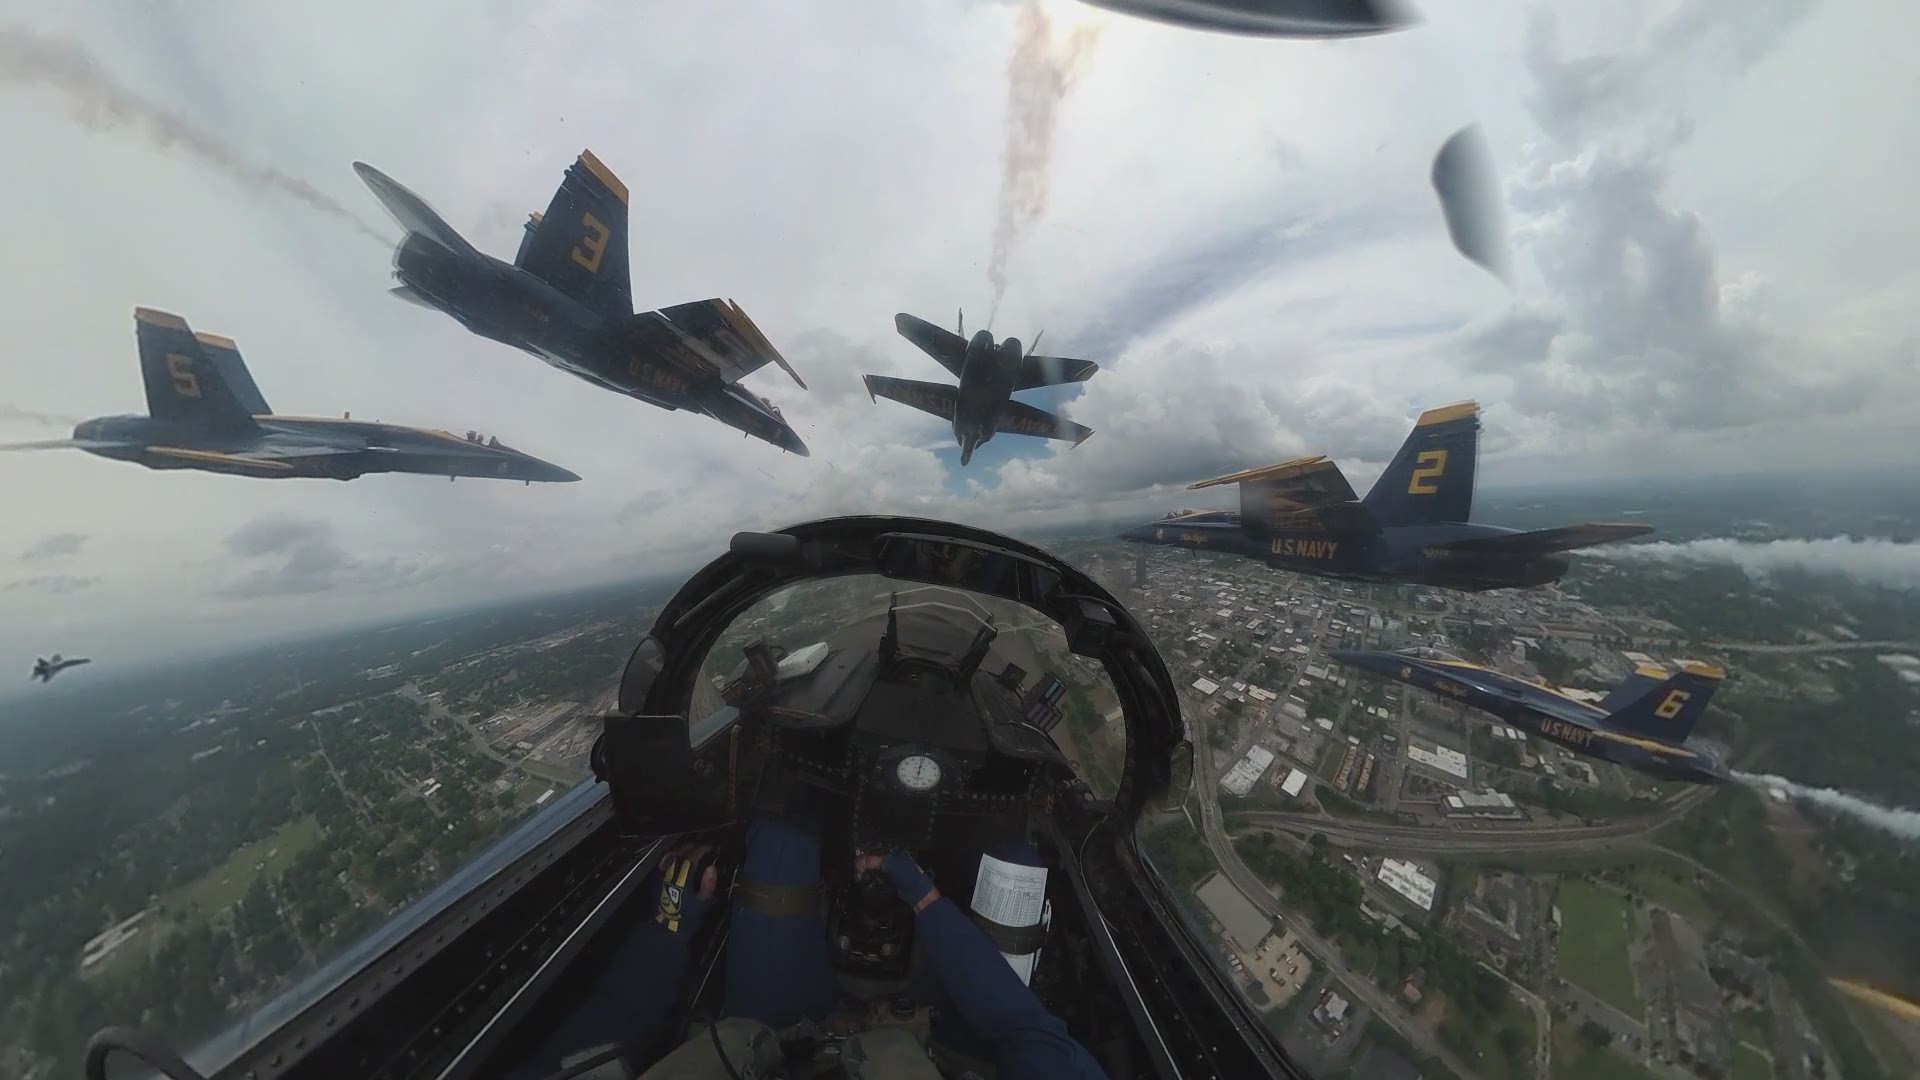 The U.S. Navy Blue Angels honored frontline COVID-19 first responders and essential workers with a formation flight over Little Rock. Footage from Lt. Cmdr. Jim Cox.